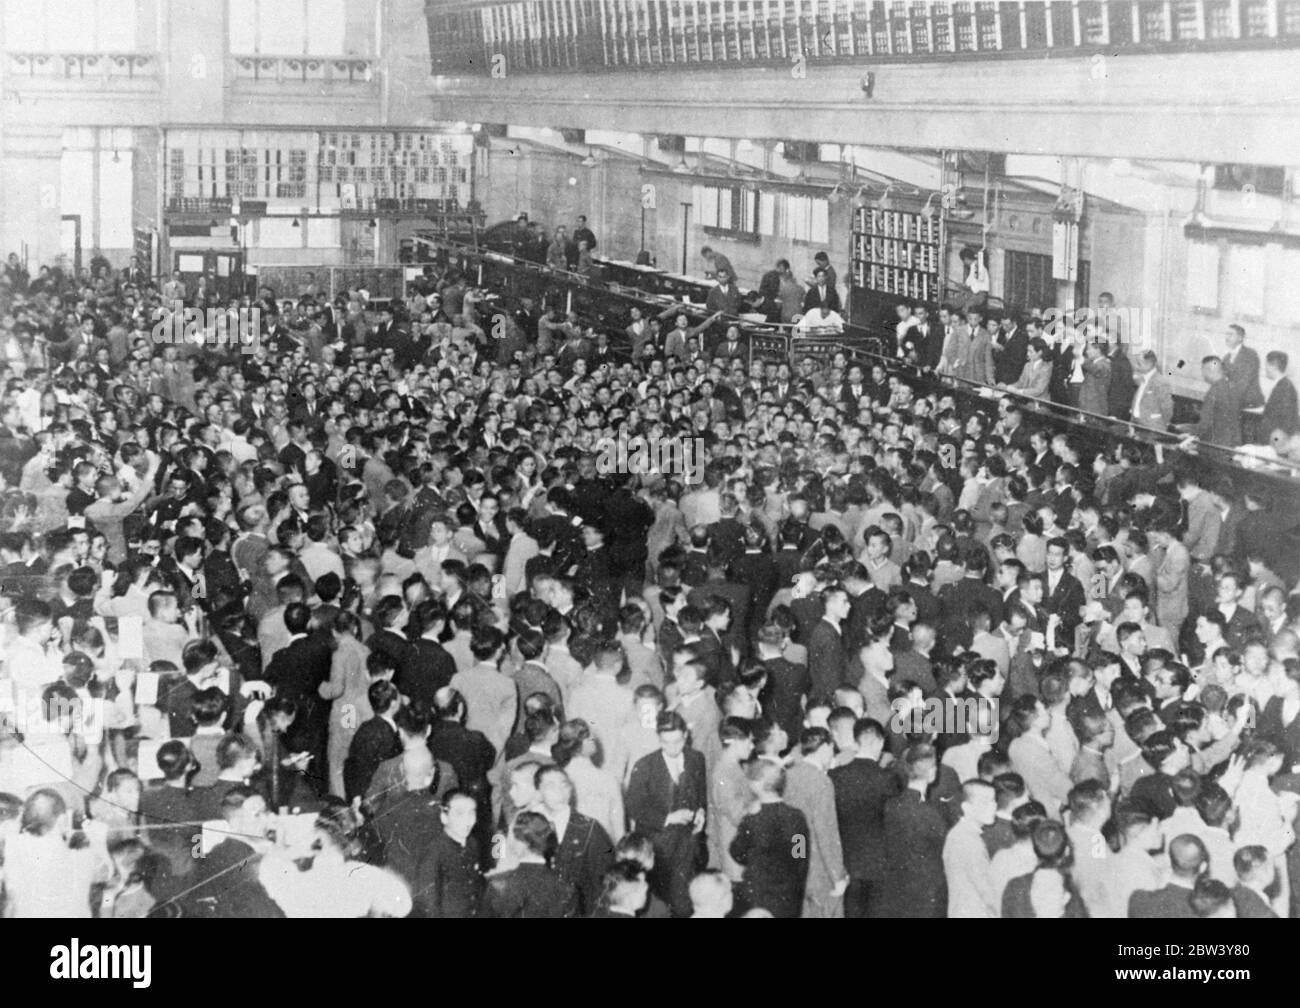 Even the Japanese can get excited . Rare picture of Tokyo Stock Exchange . This picture one of the few ever made , shows the excited scene in the Tokyo Stock Exchange as internal and world affairs reacted on the market . 8 March 1937 Stock Photo